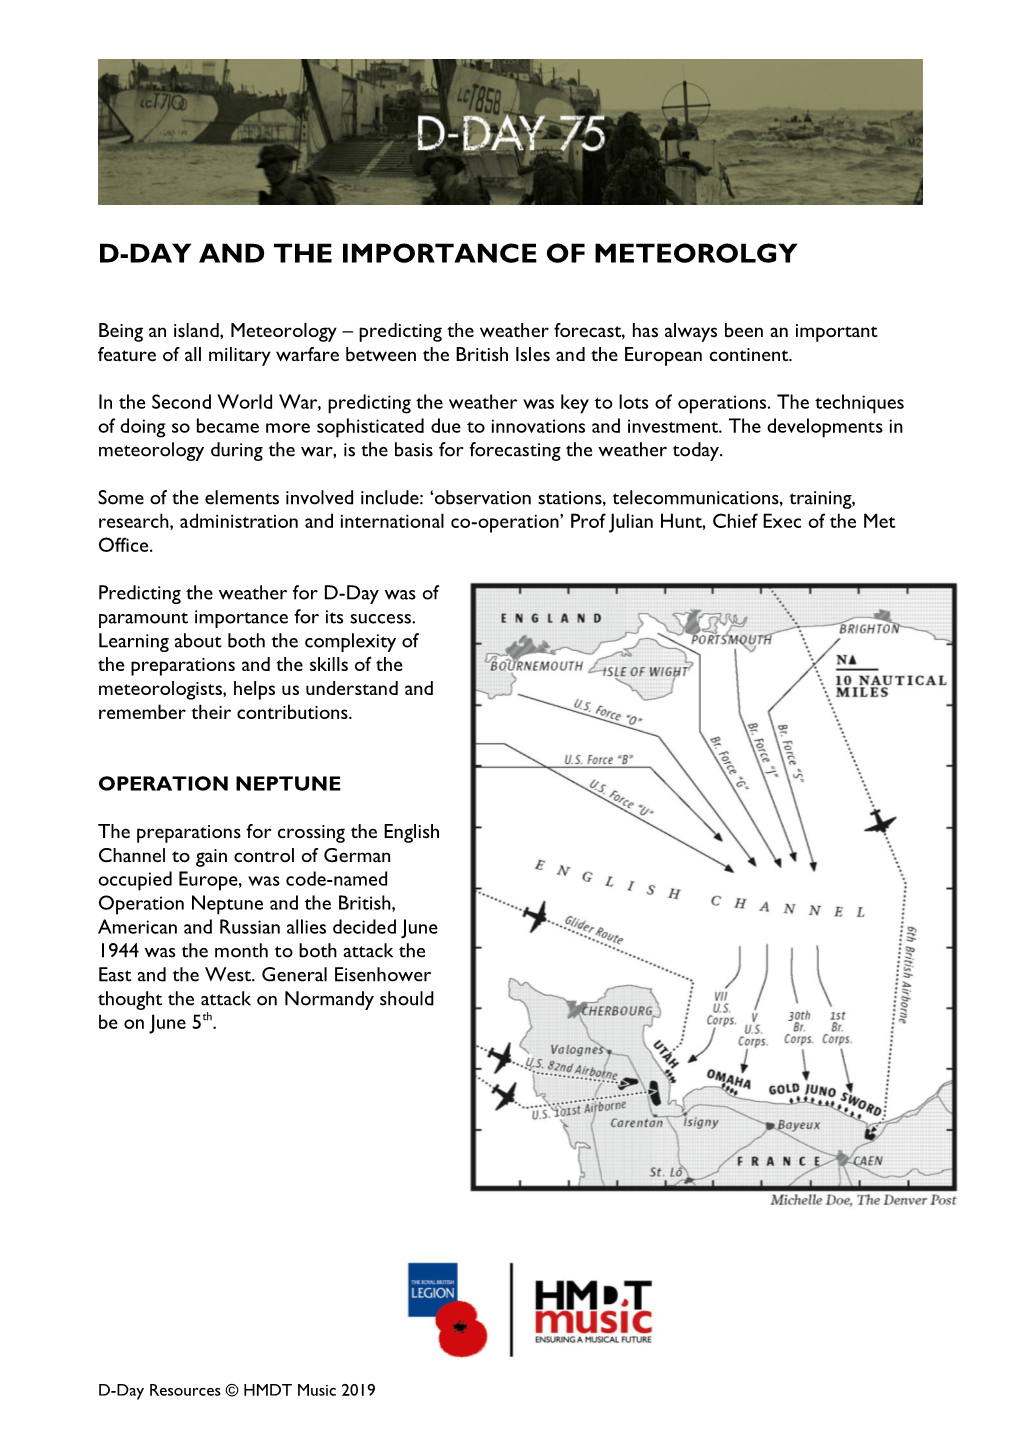 D-Day and the Importance of Meteorolgy